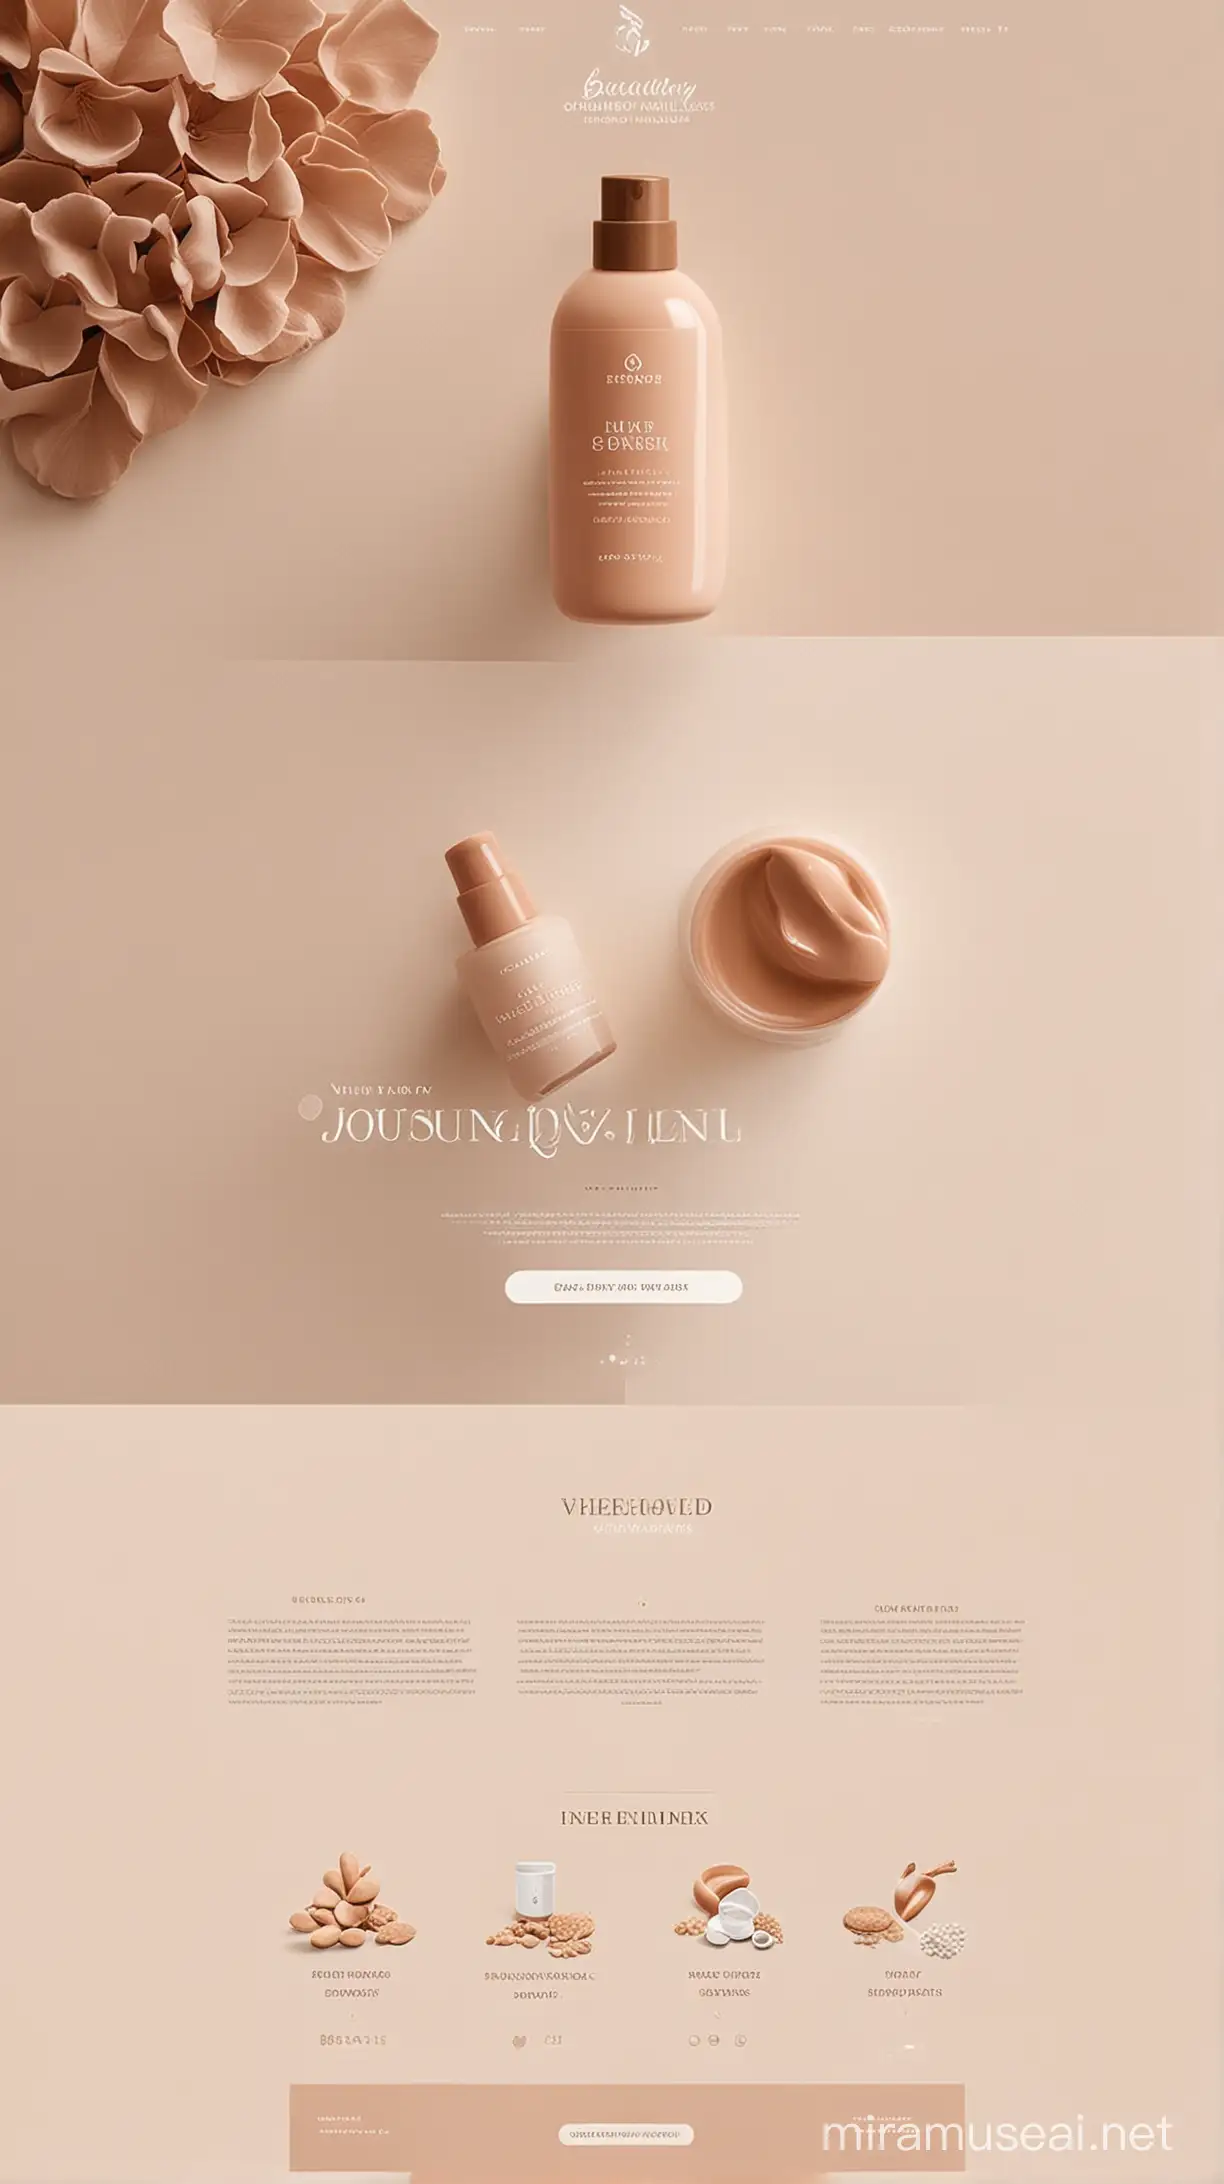 website, ui/ux, beauty and wellness white and nude color, 
ecommerce,  full page